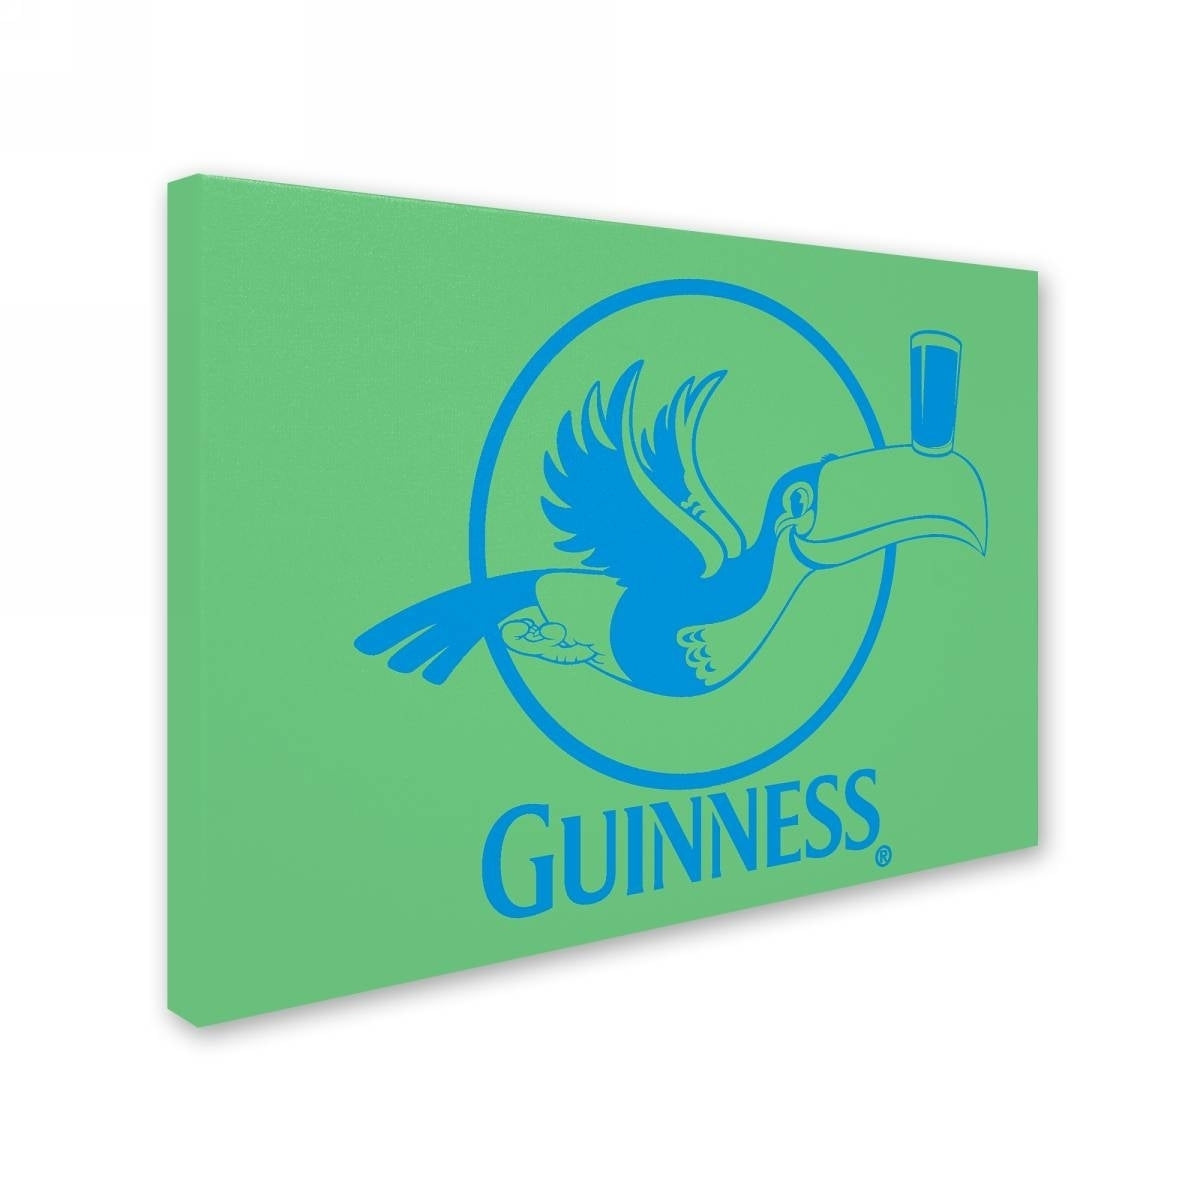 A vibrant Guinness Brewery 'Guinness XVI' canvas wall art featuring a green sign with a Guinness bird and a glass of beer.